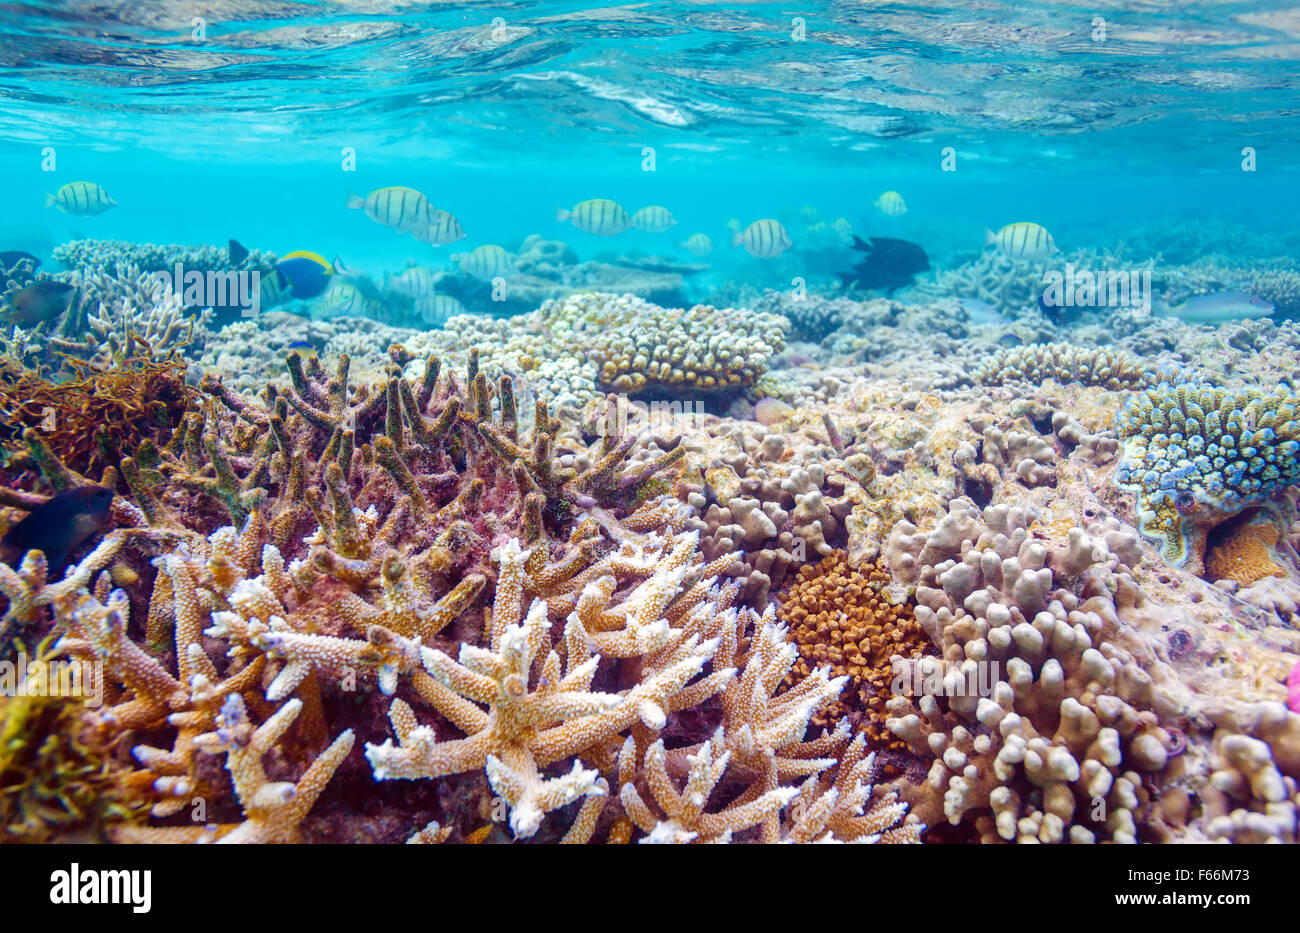 Shallow Water Coral Reef, Maldives Stock Photo - Alamy